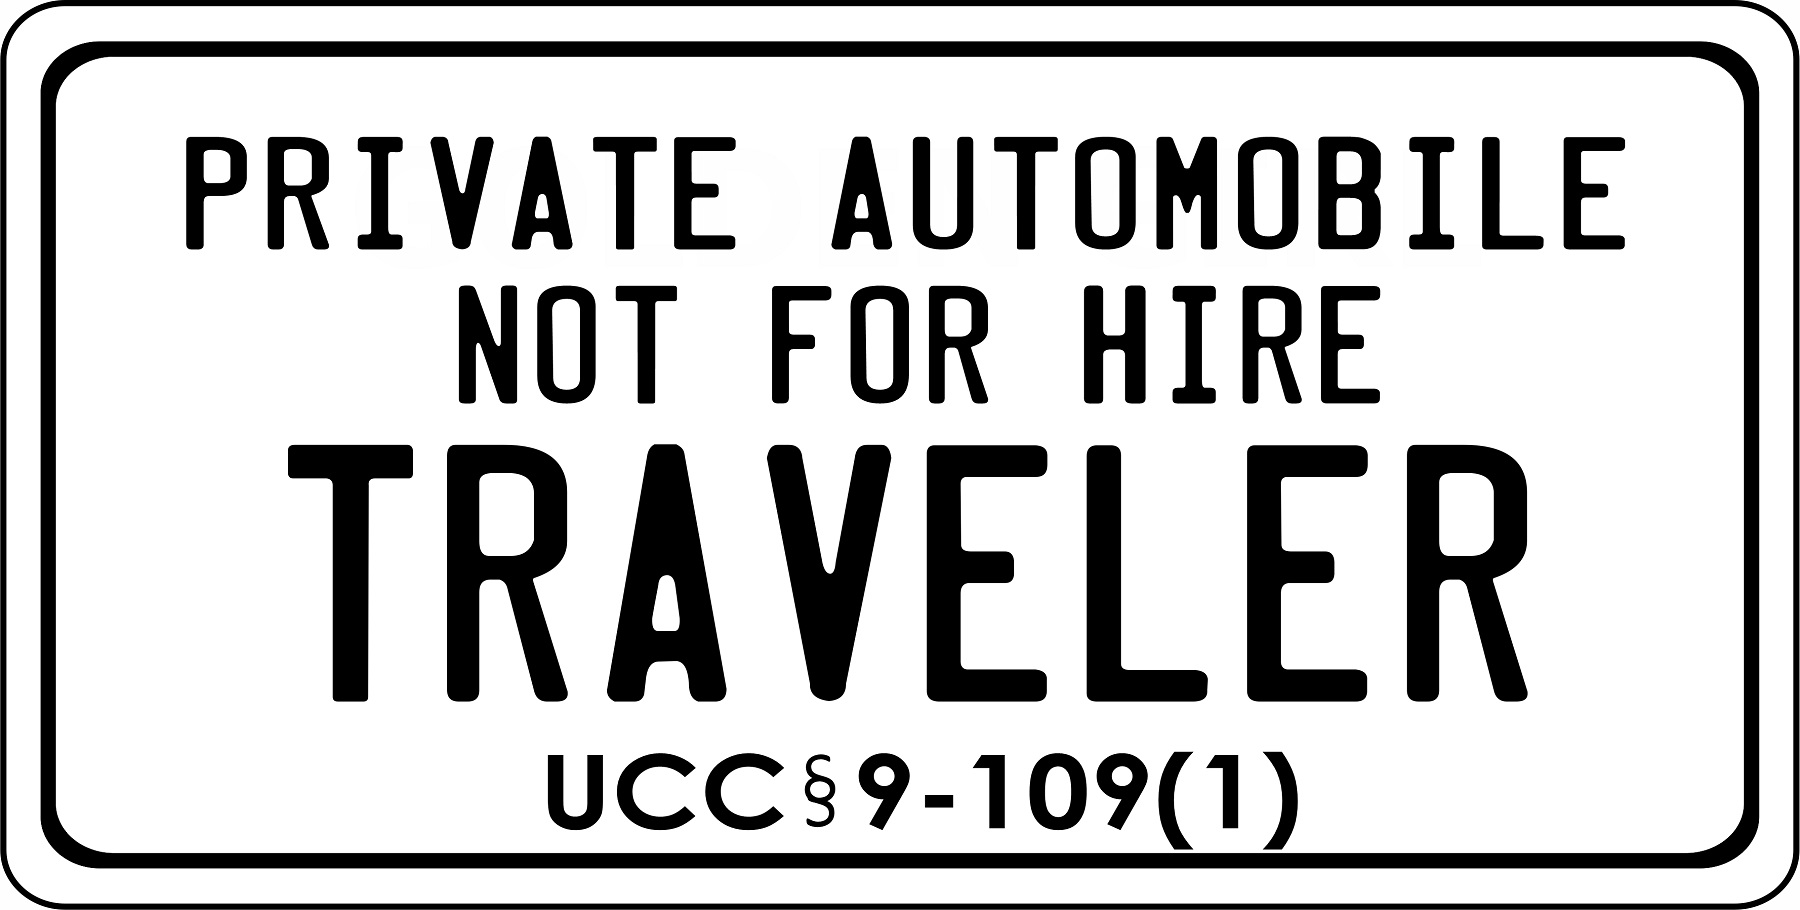 Not For Hire Traveler White Photo LICENSE PLATE